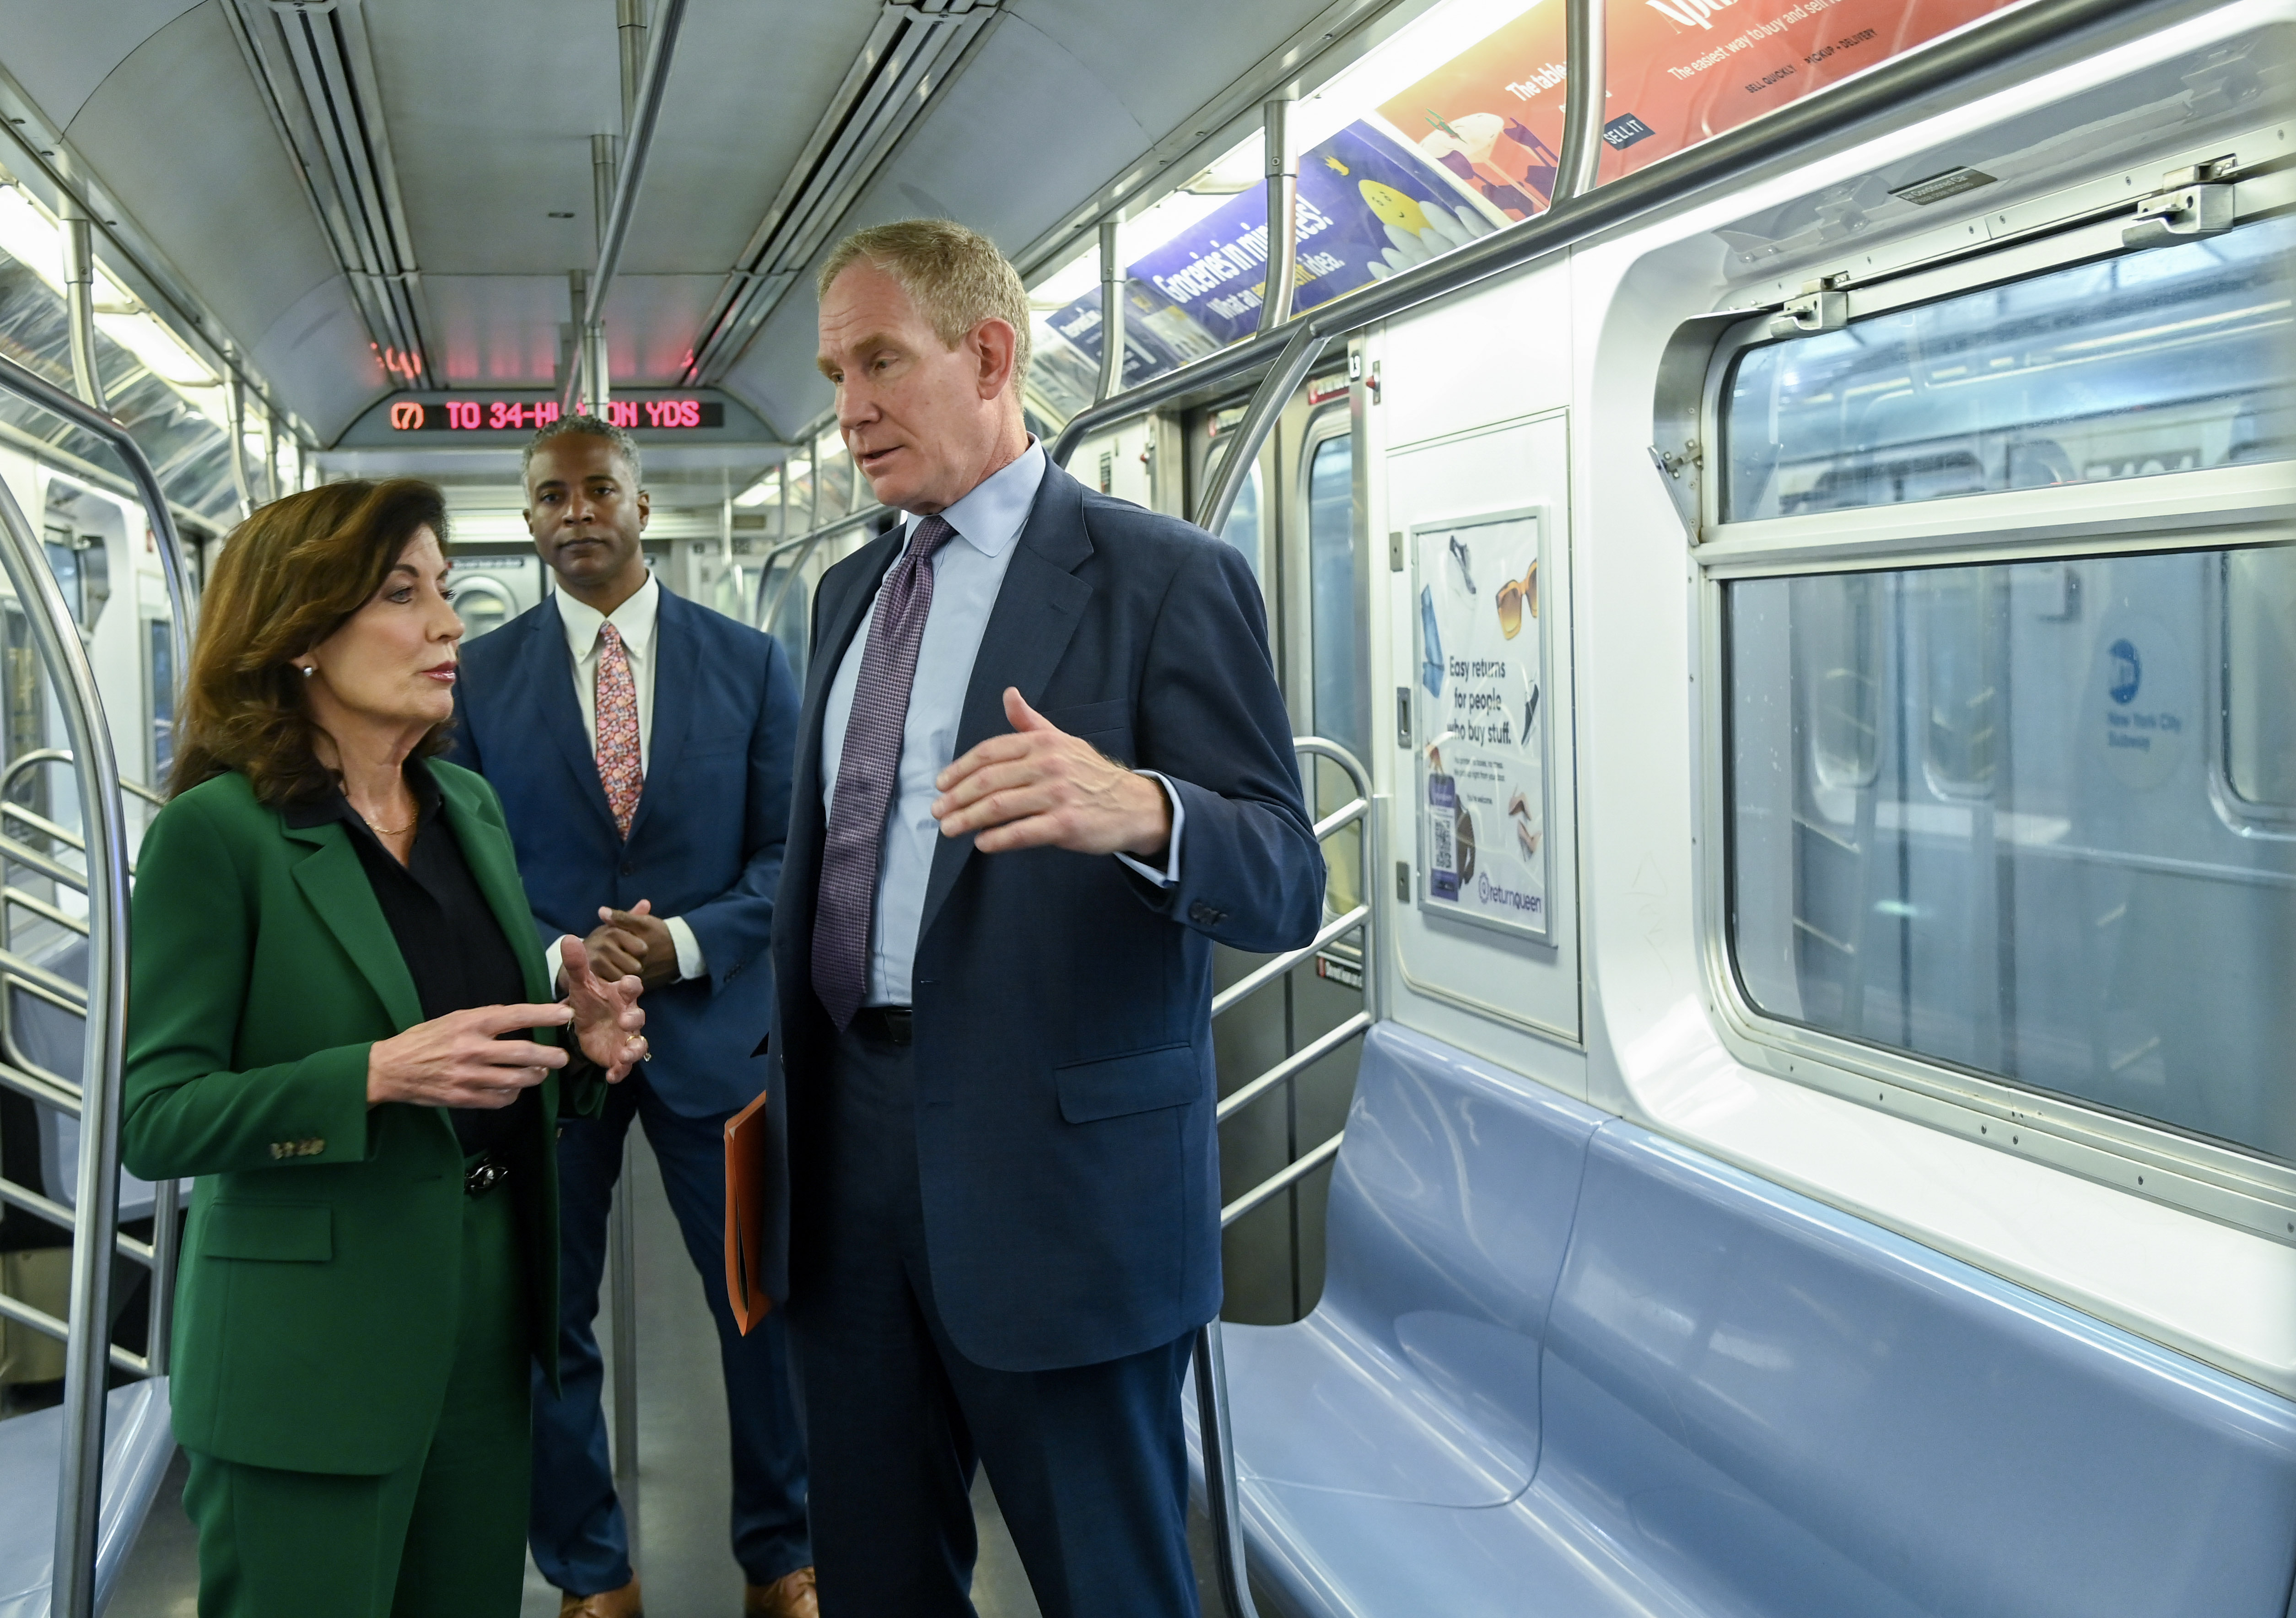 ICYMI: Governor Hochul Announces MTA to Install Security Cameras in Every New York City Subway Car